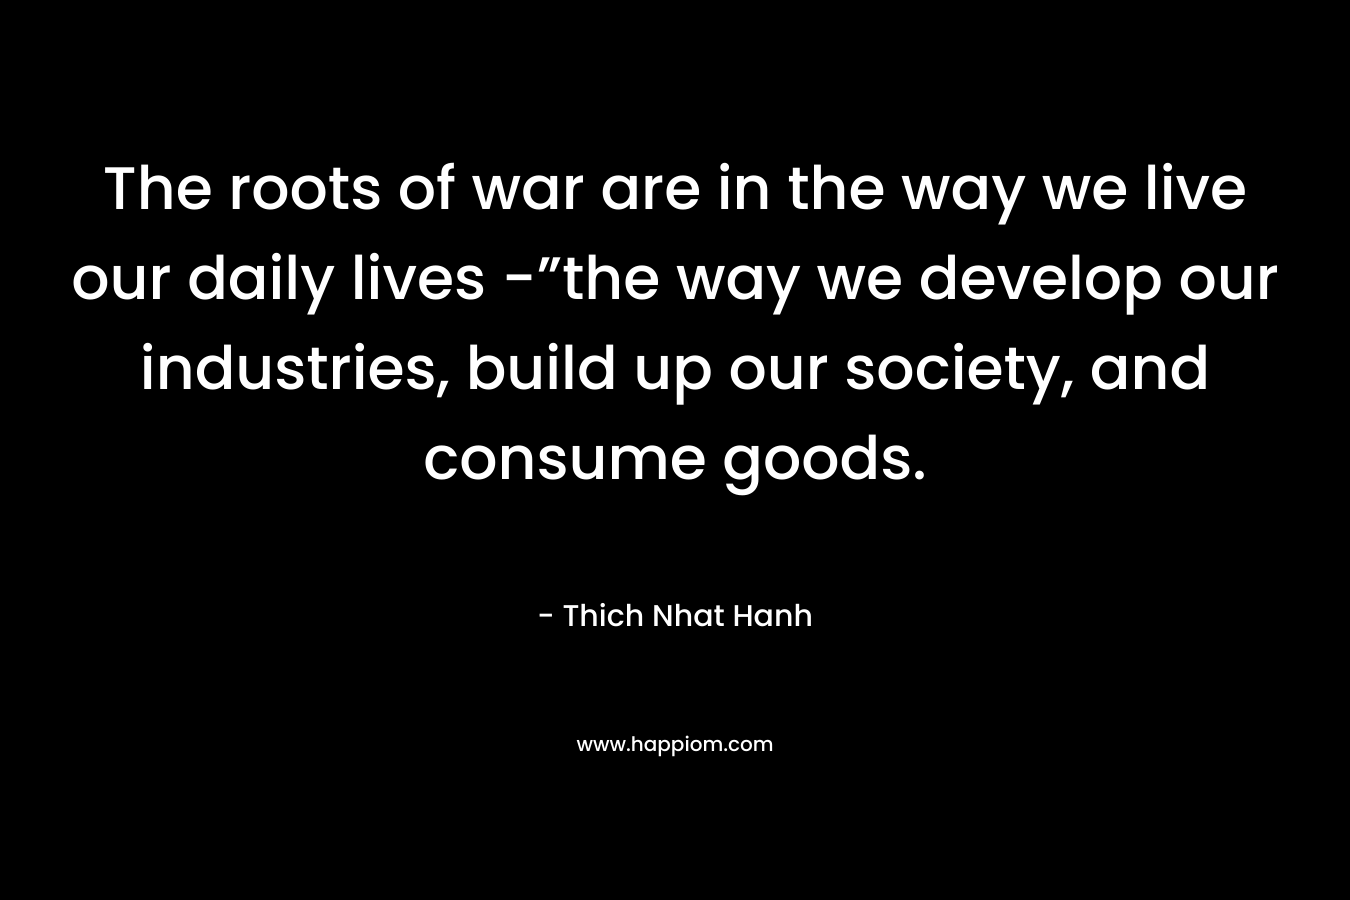 The roots of war are in the way we live our daily lives -”the way we develop our industries, build up our society, and consume goods.